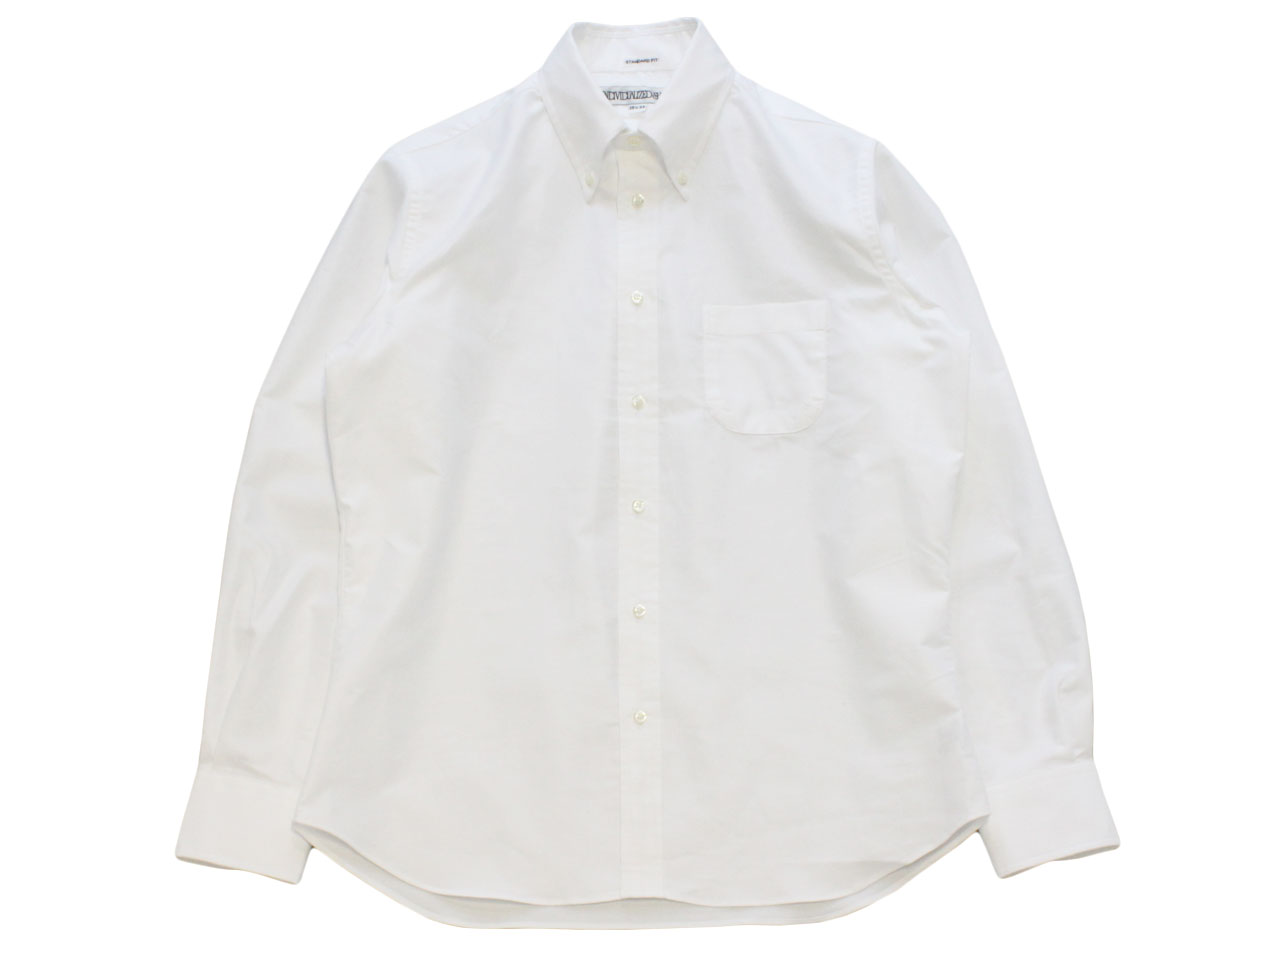 INDIVIDUALIZED SHIRTSB.D SHIRT *GREAT AMERICAN OX WHITE / STANDARD FIT